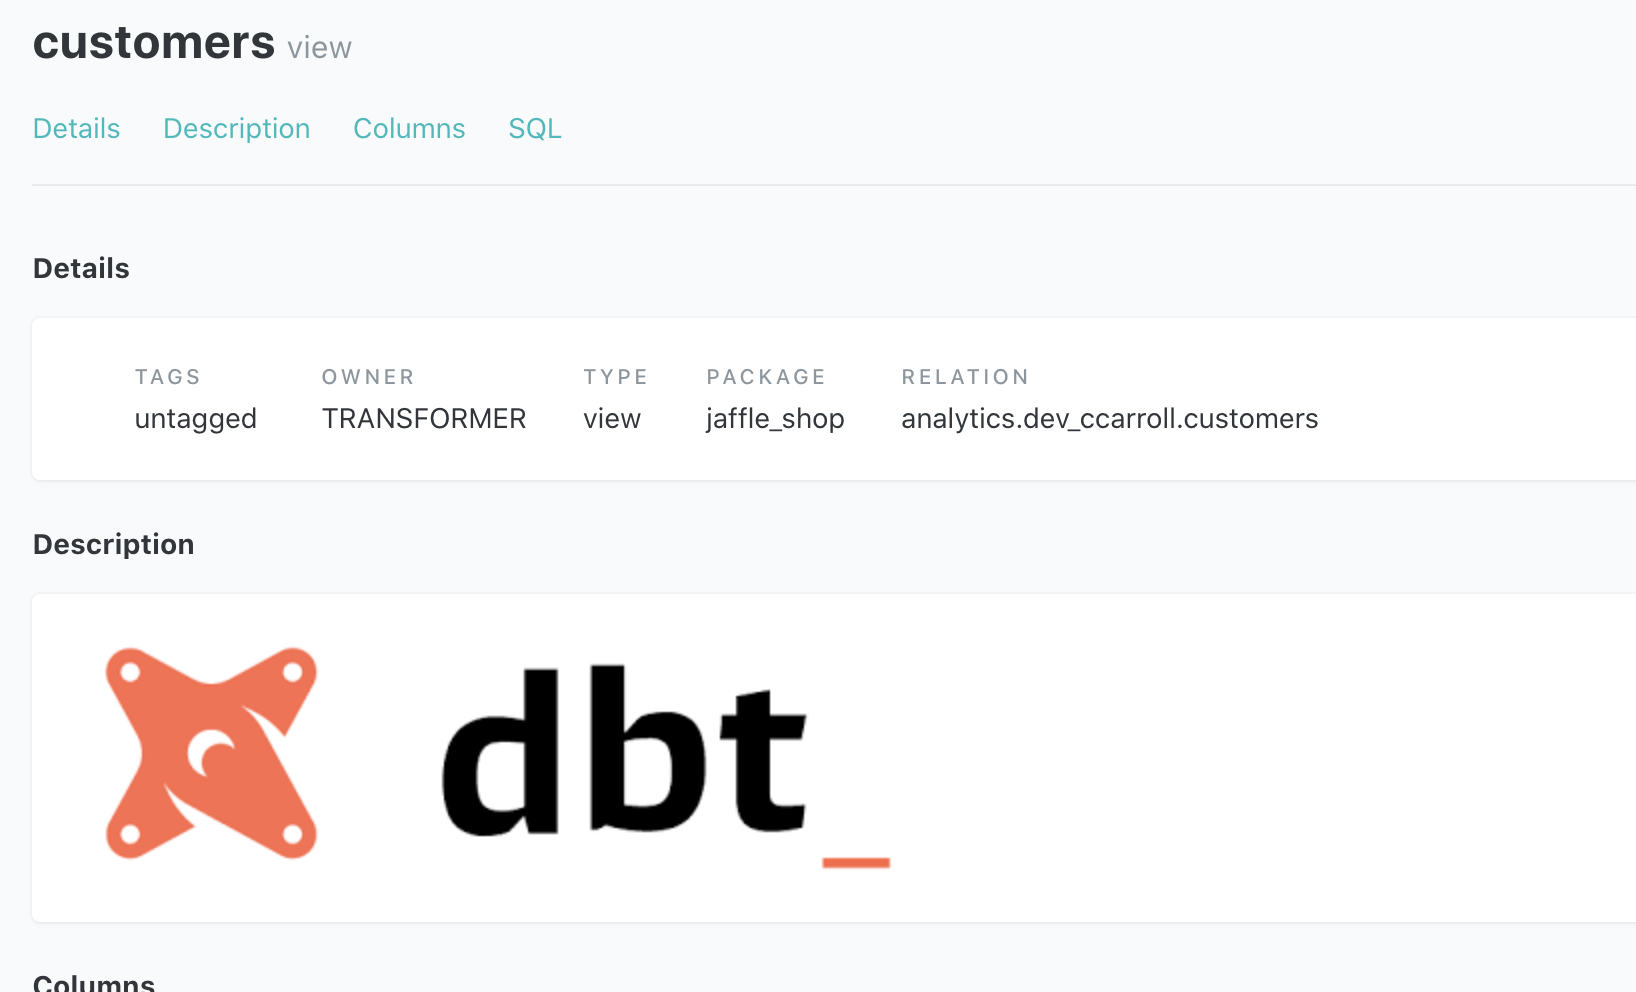 The image at assets/dbt-logo.svg is rendered correctly